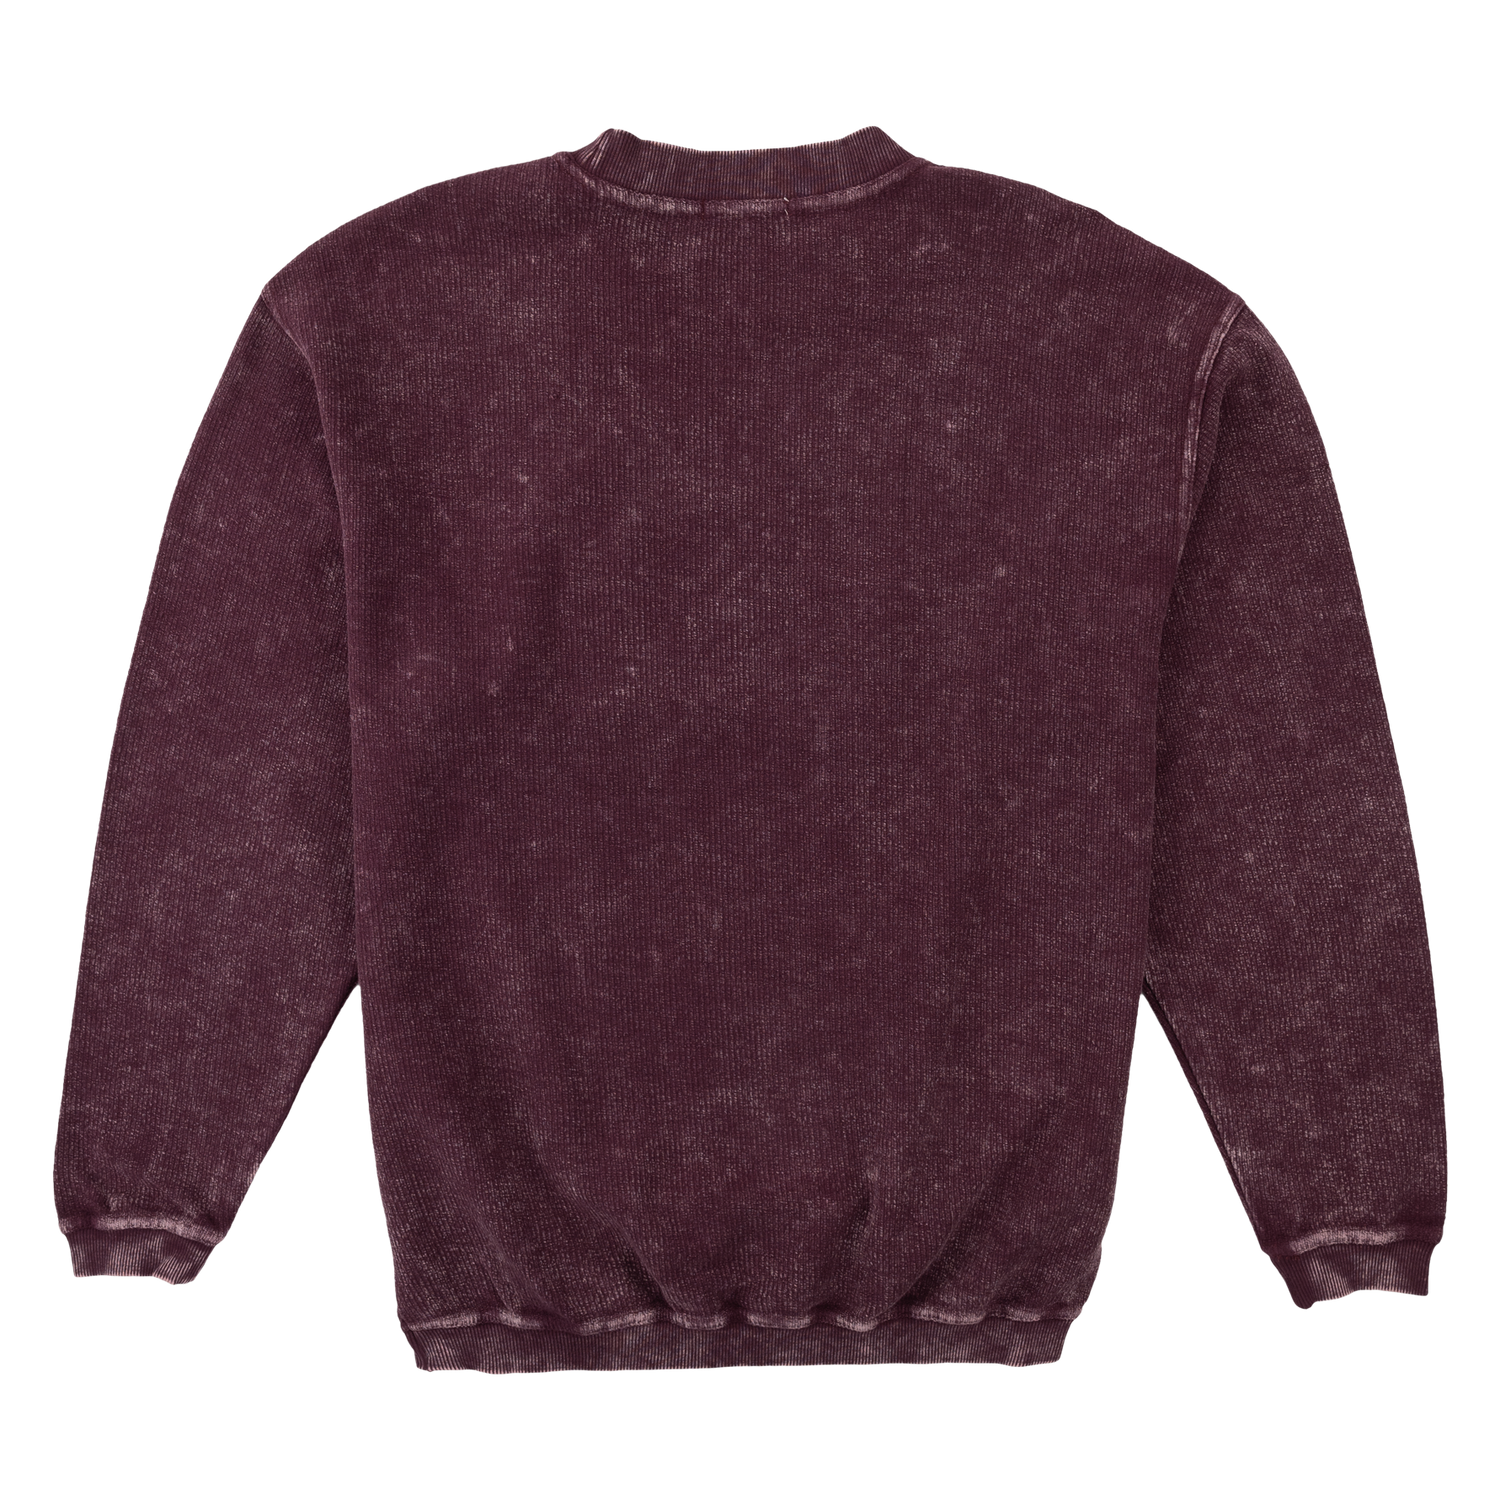 Texas Aggies Simple Embroidered Design Corduroy Pullover